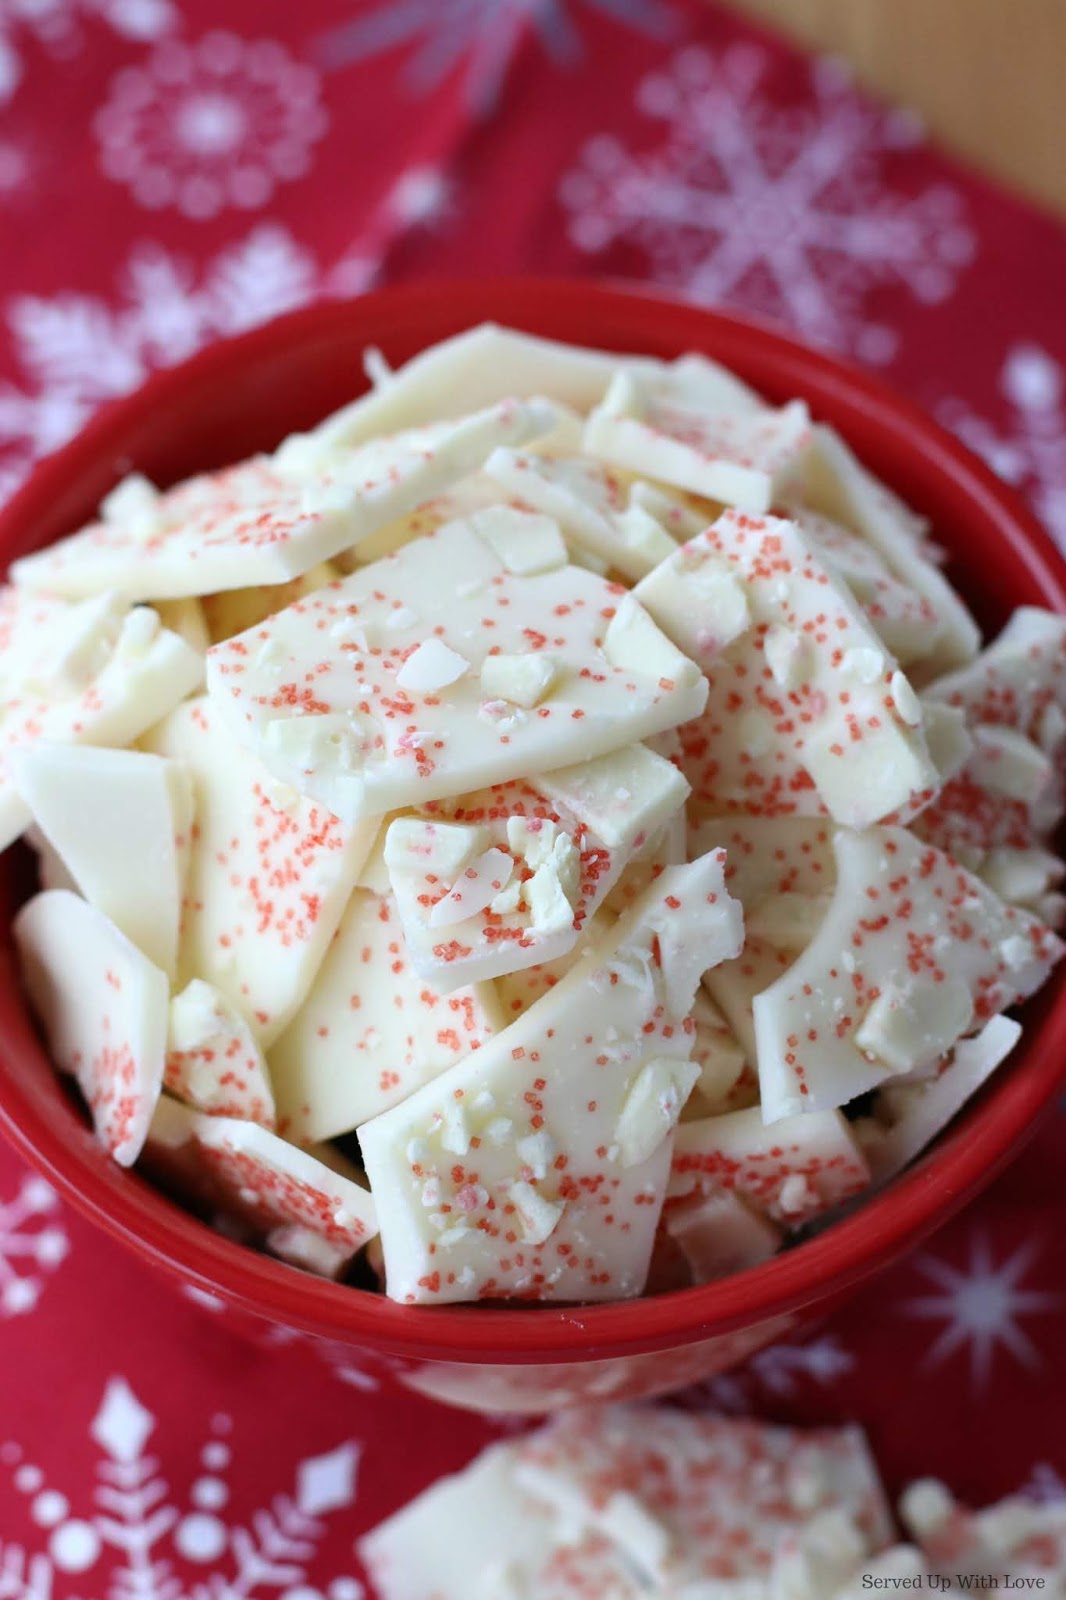 Served Up With Love: Peppermint Bark